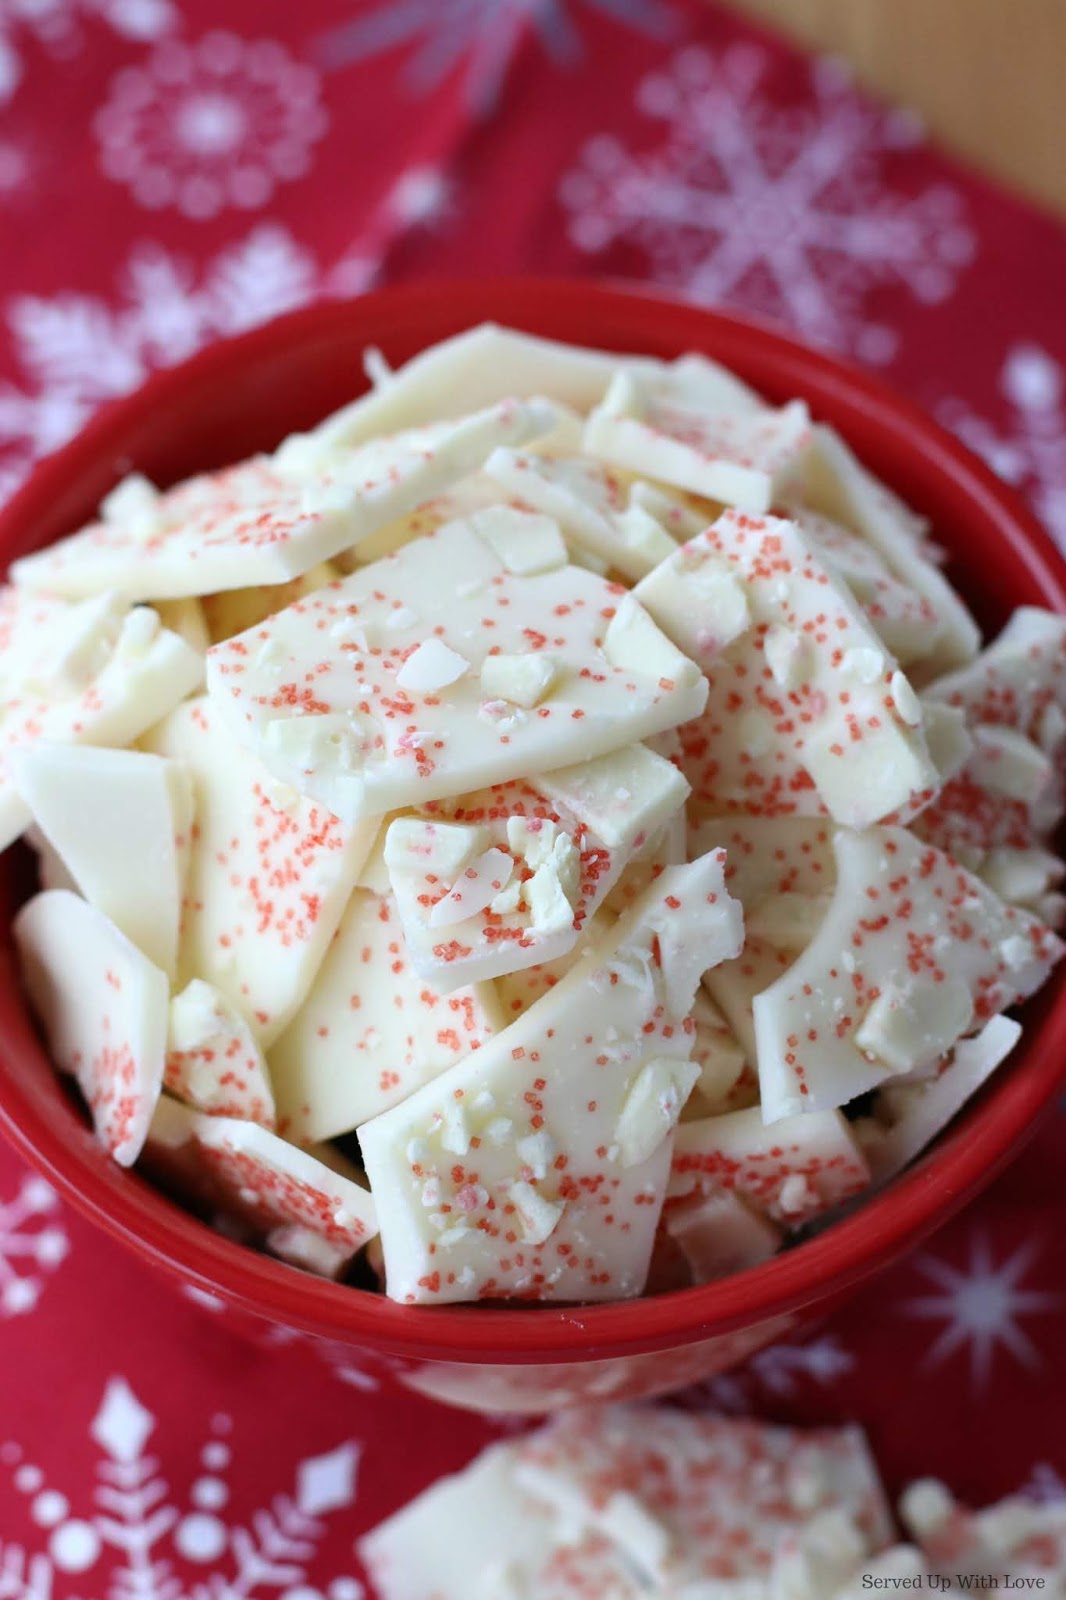 Served Up With Love: Peppermint Bark